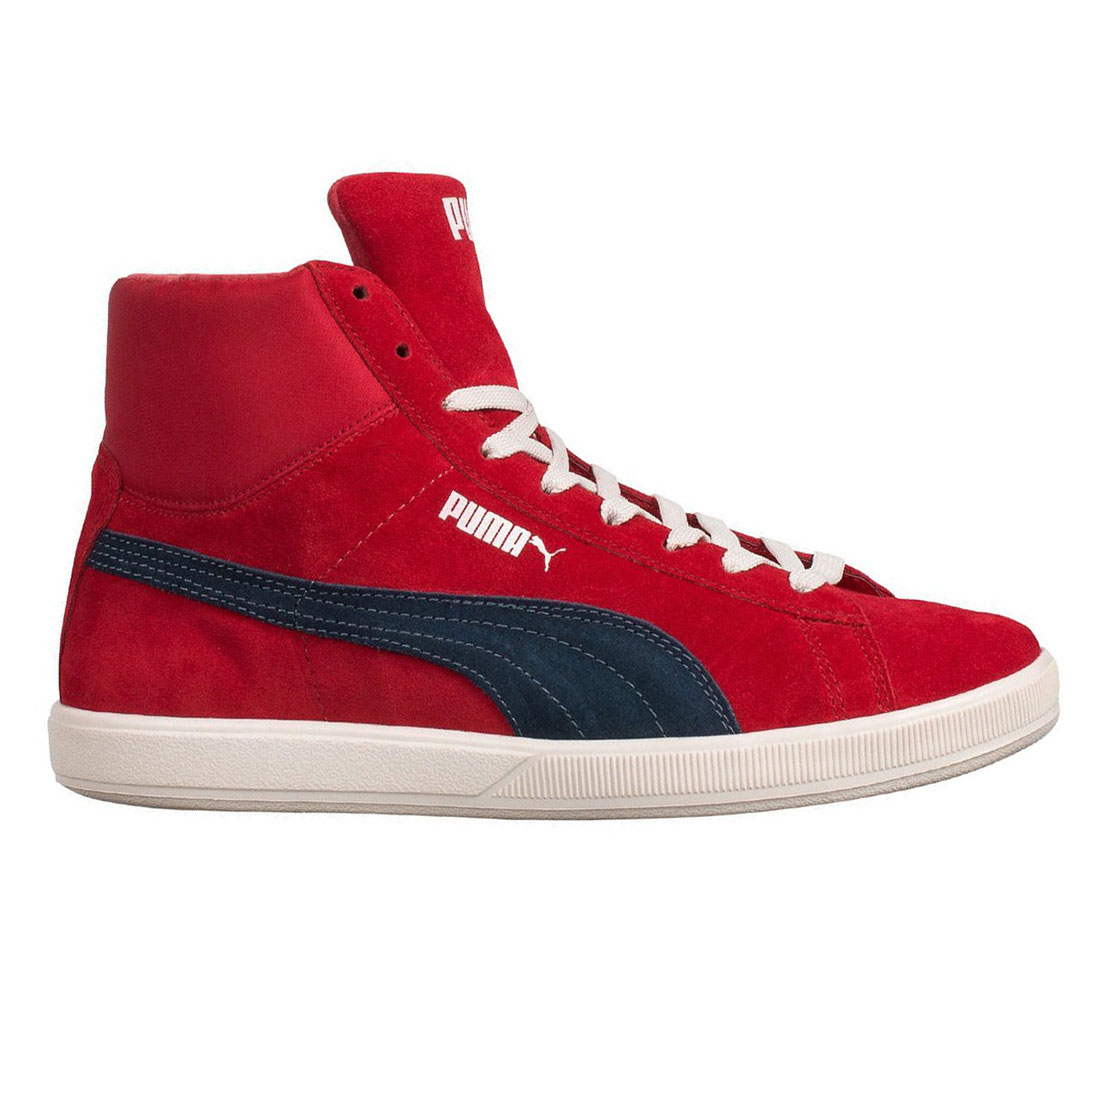 Puma Archive Lite Mid Suede red Кецове 356426-04